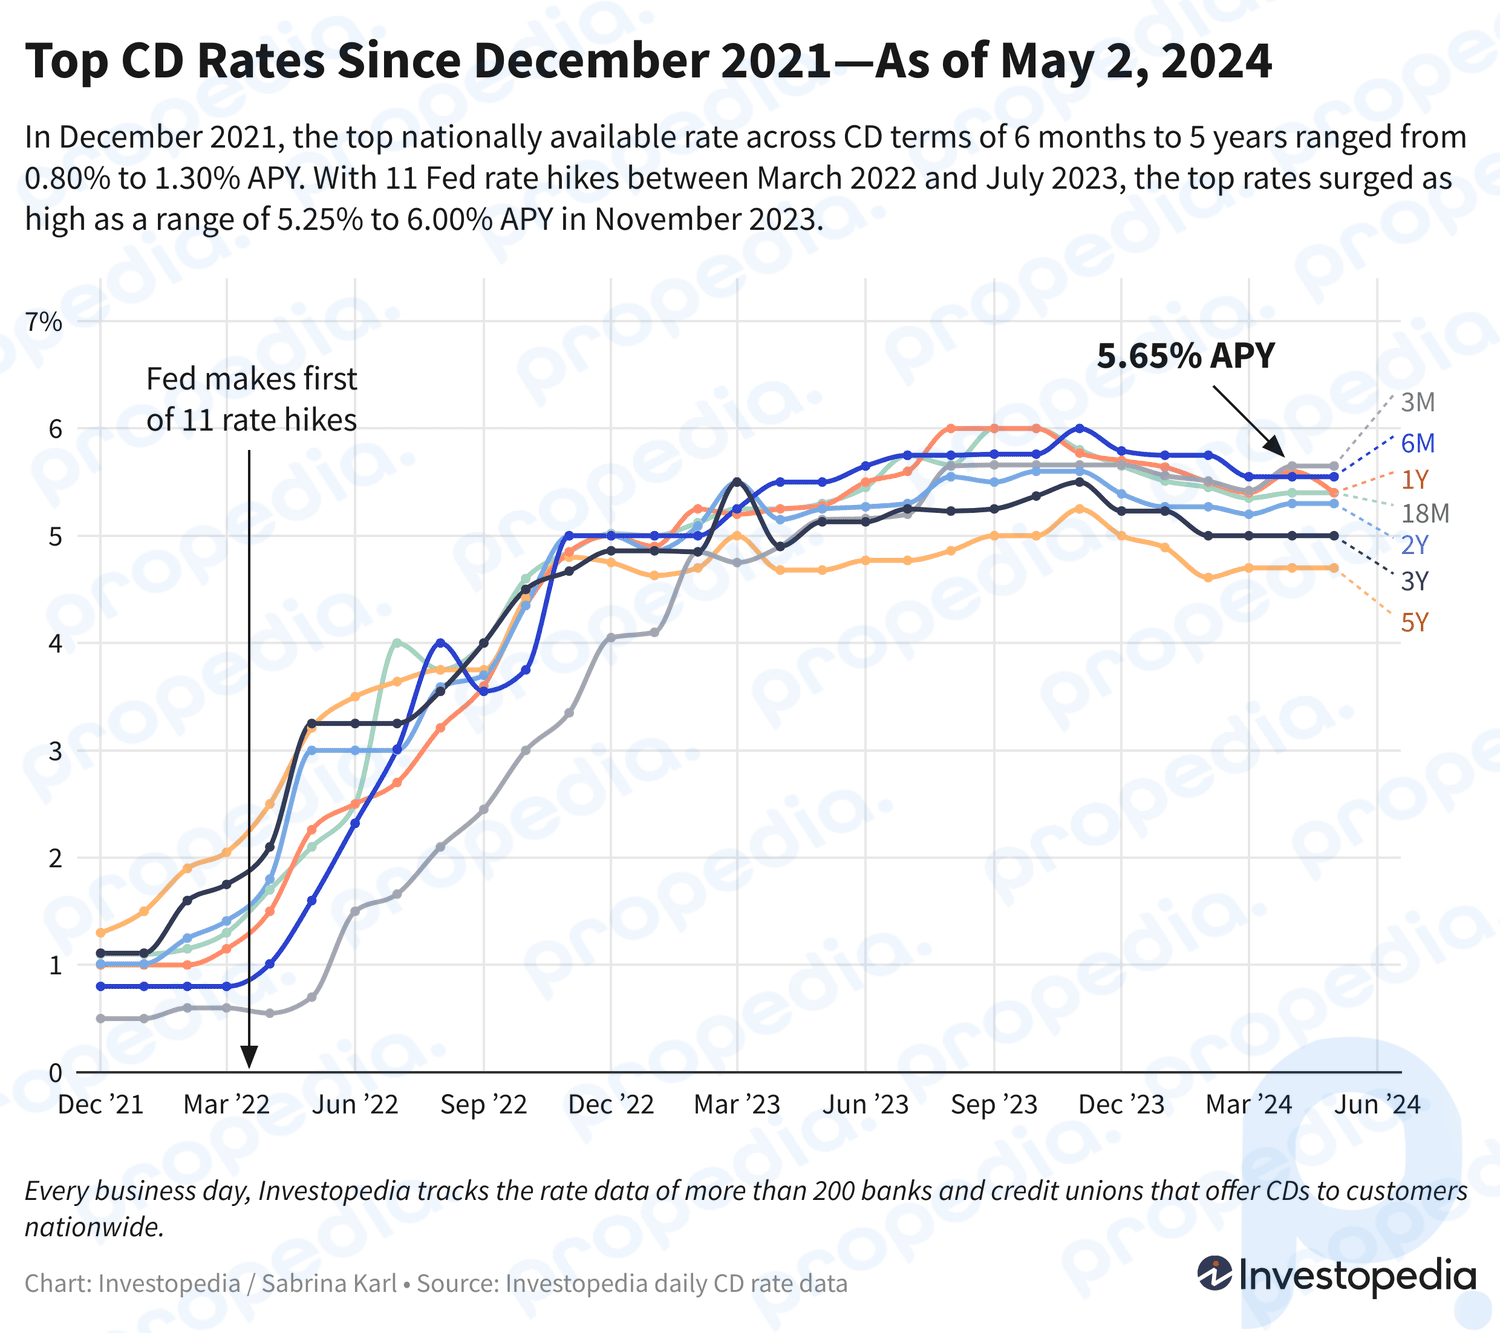 Line graph showing the top CD rate by term each month from Dec 2021 to the present - May 2, 2024